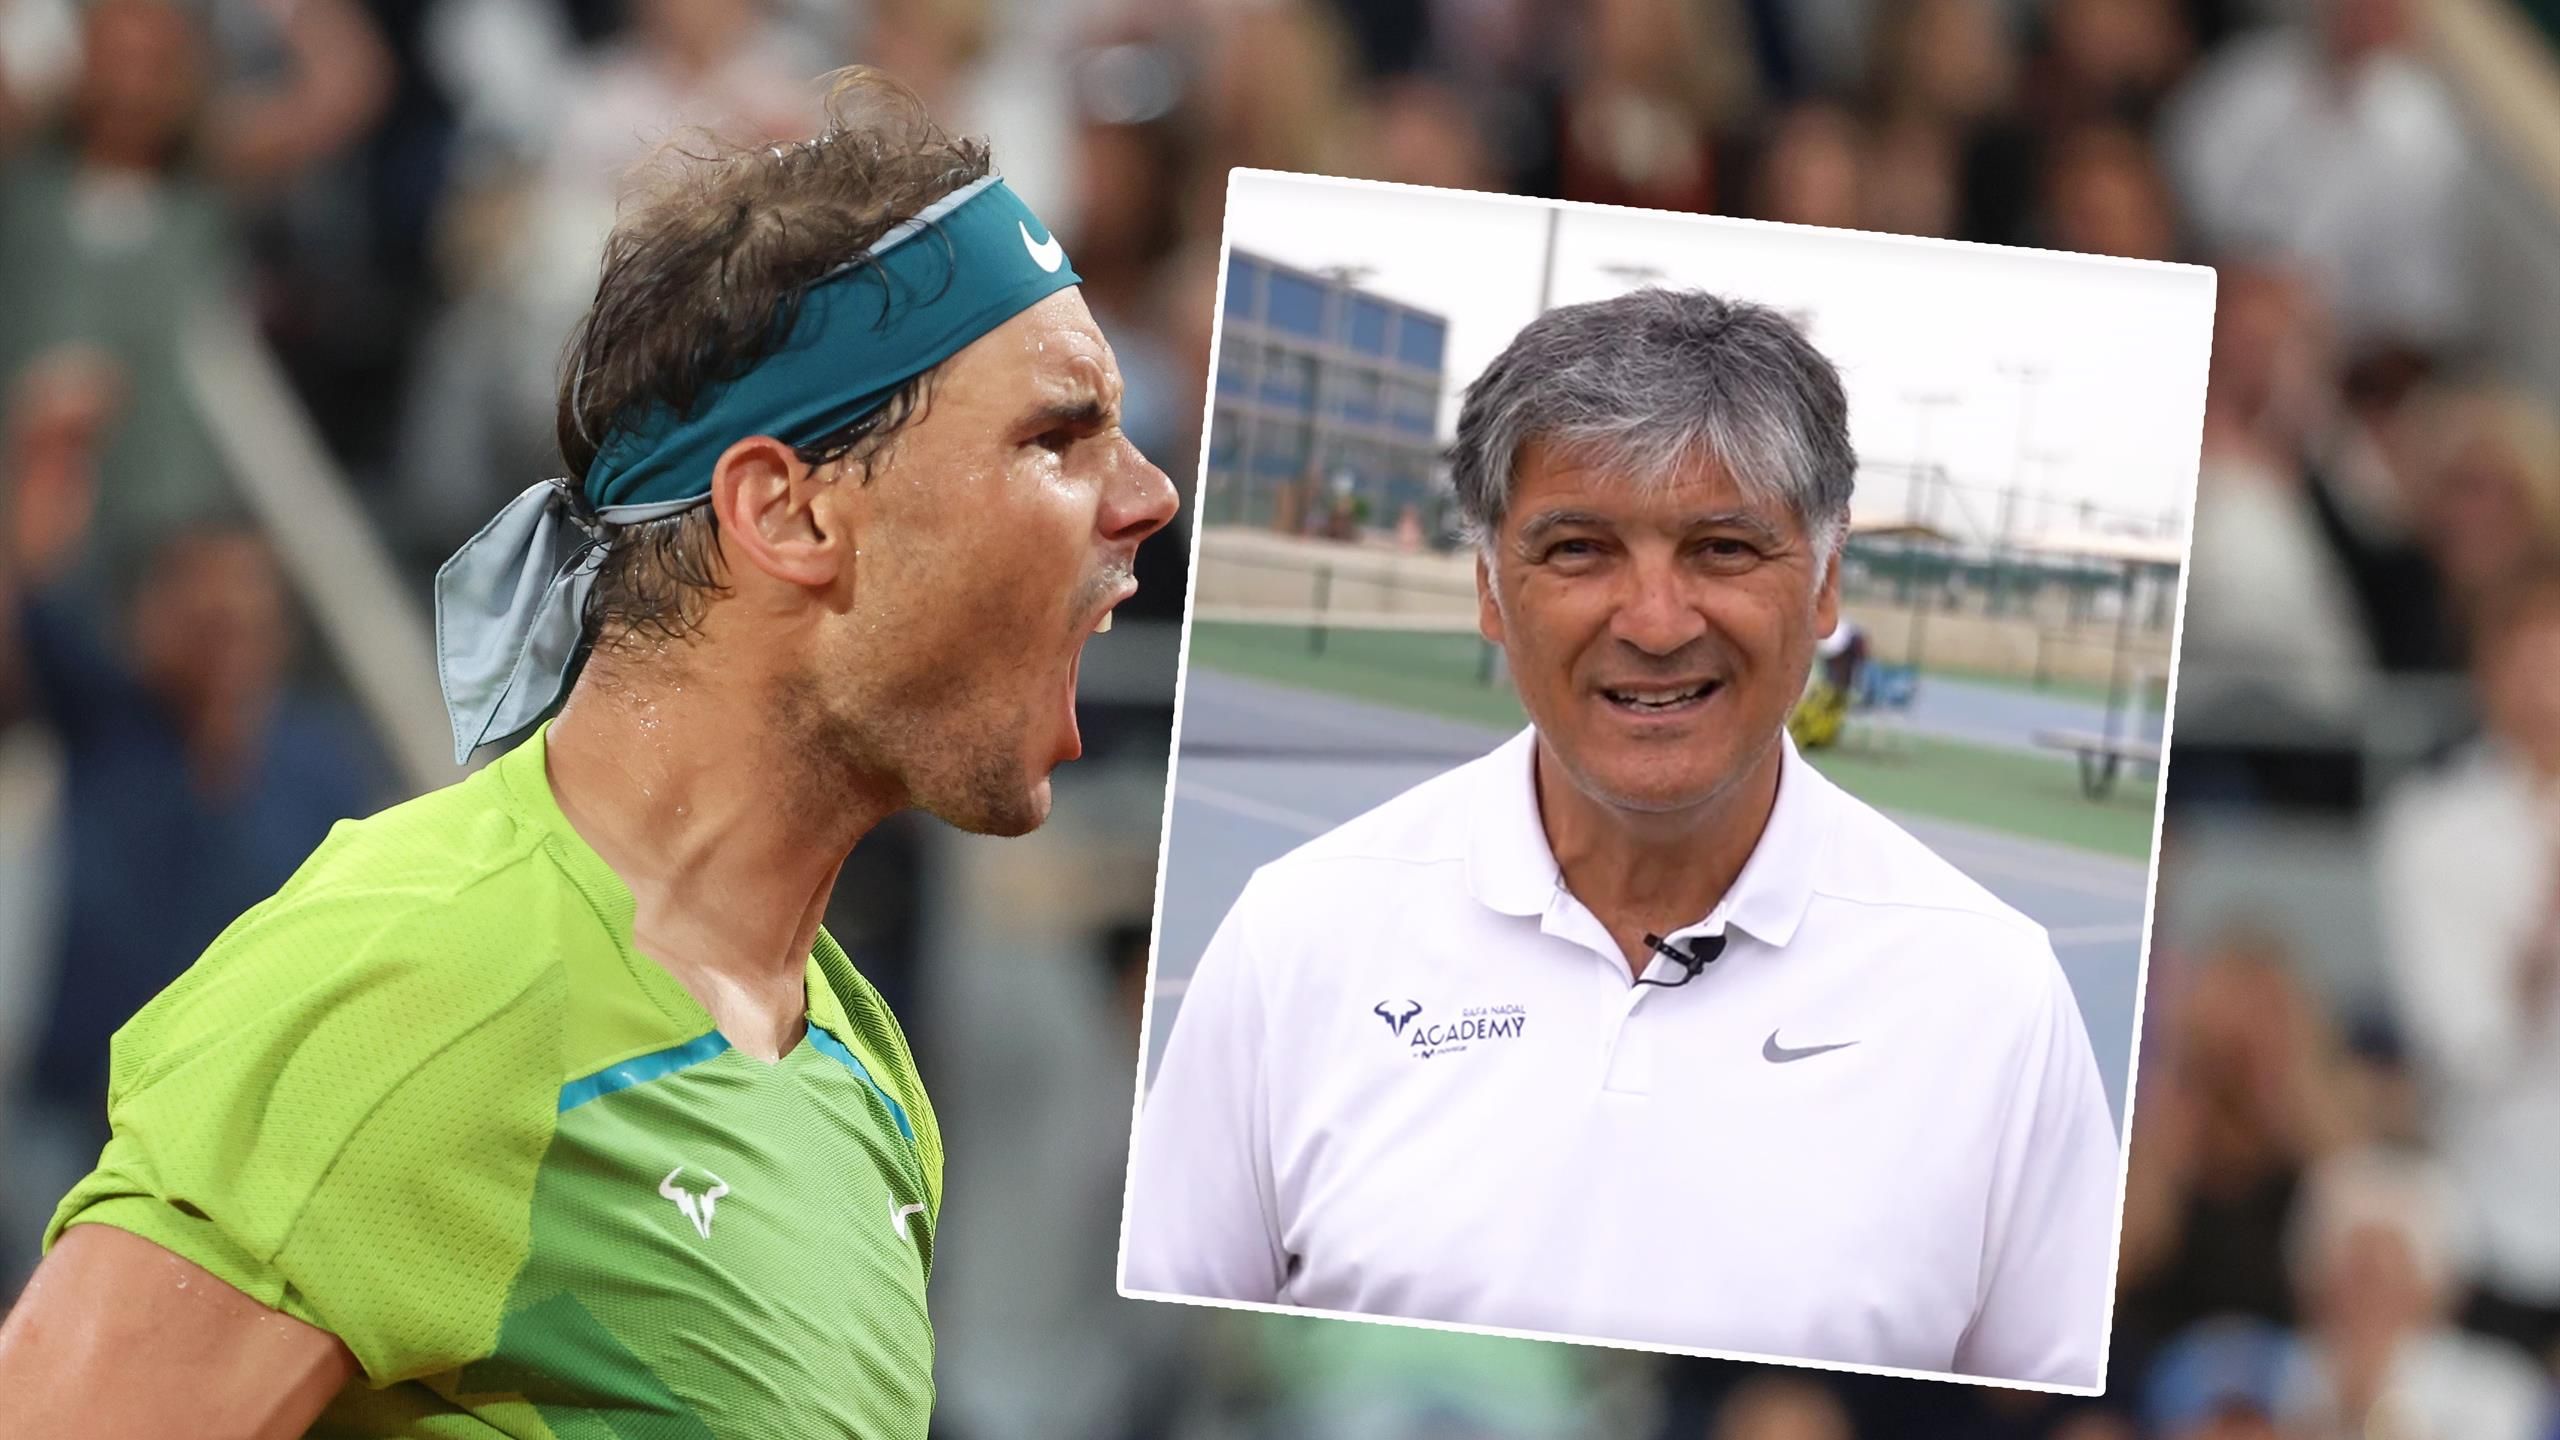 Exclusive Double joy - Toni Nadal reacts to Casper Ruud facing idol Rafael Nadal in French Open final